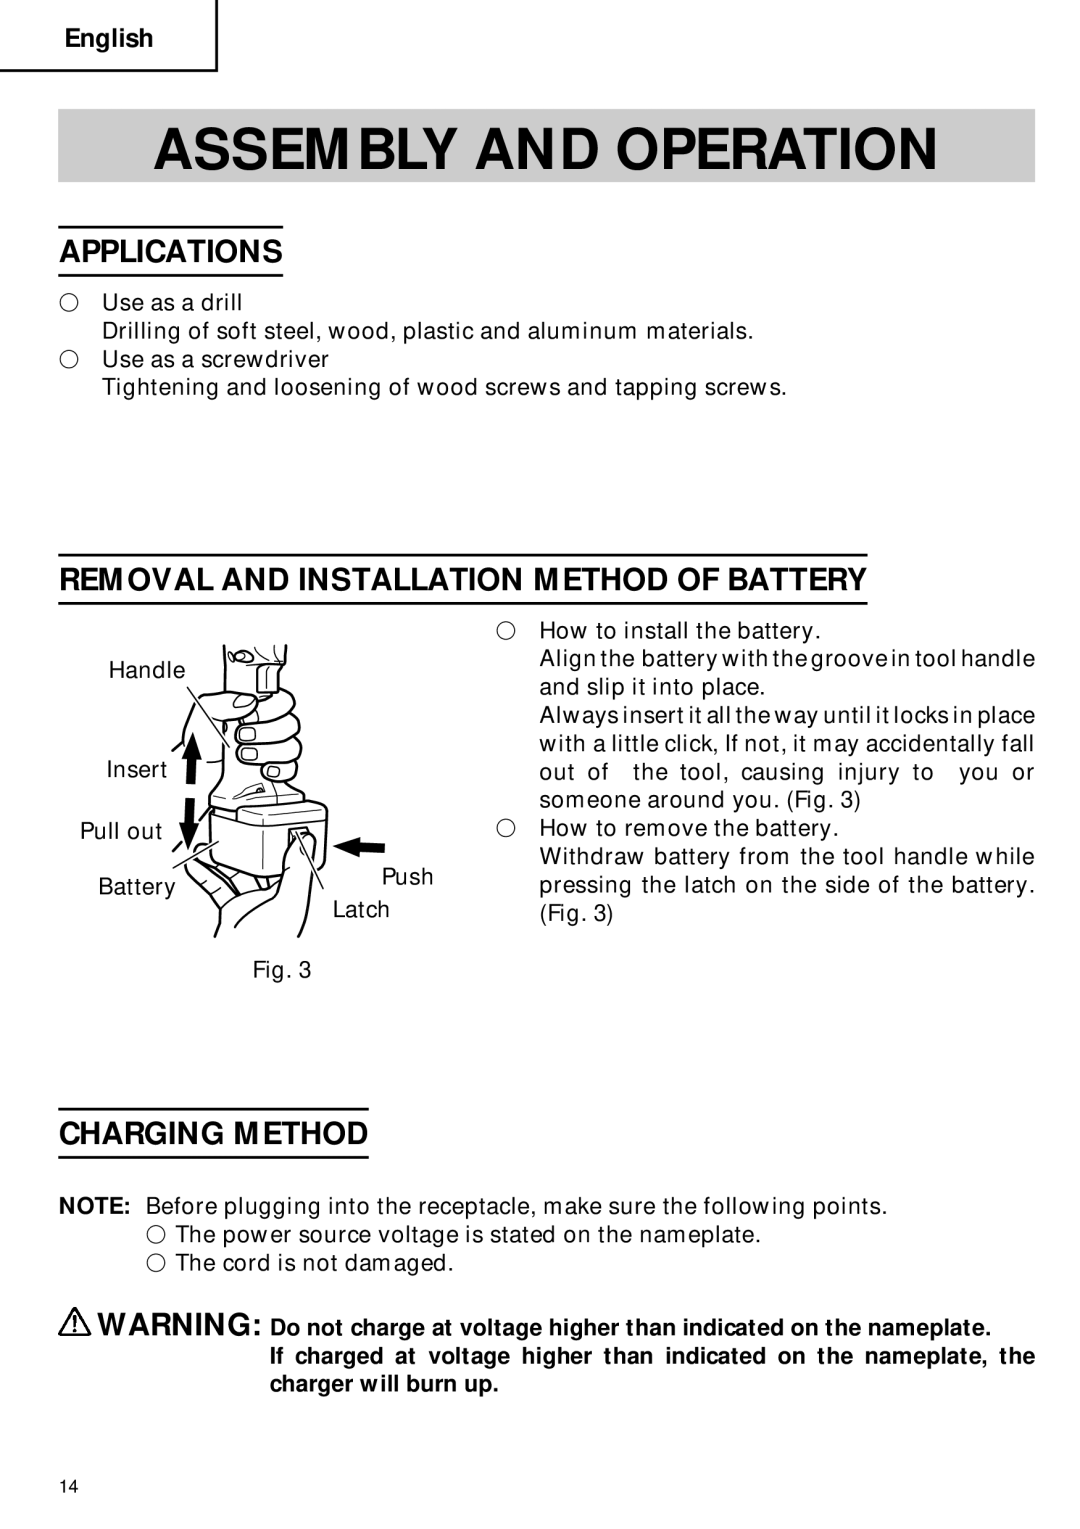 Hitachi DN 12DY Assembly and Operation, Applications, Removal and Installation Method of Battery, Charging Method 